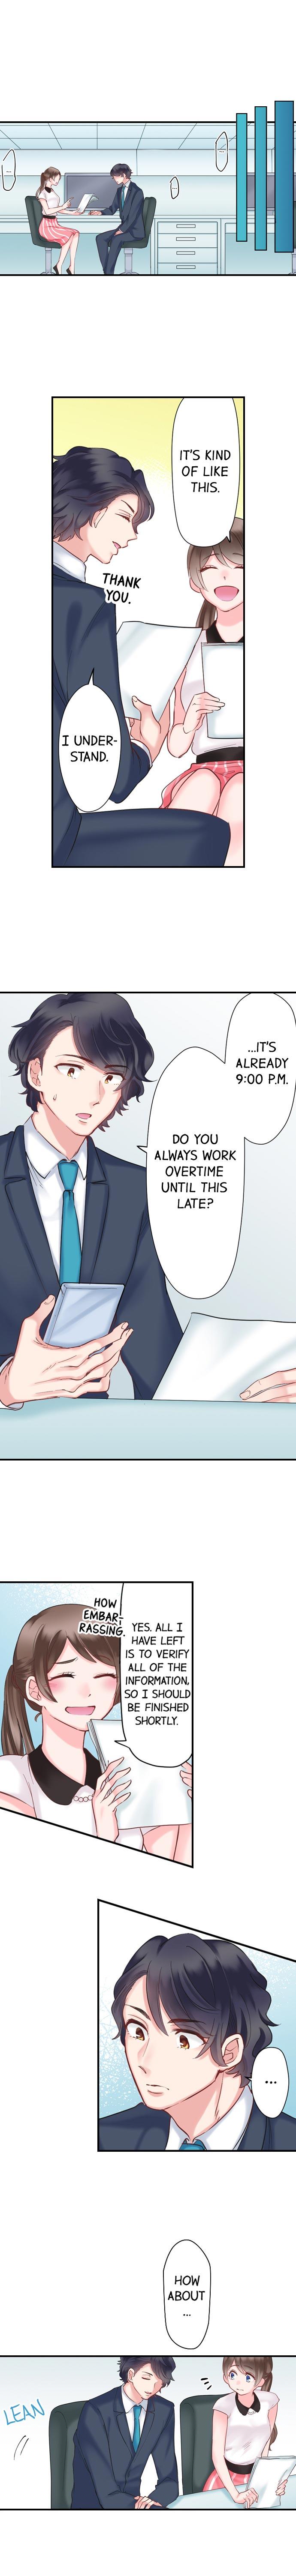 70% of Overtime Workers Will Have Sex - Chapter 14 Page 4